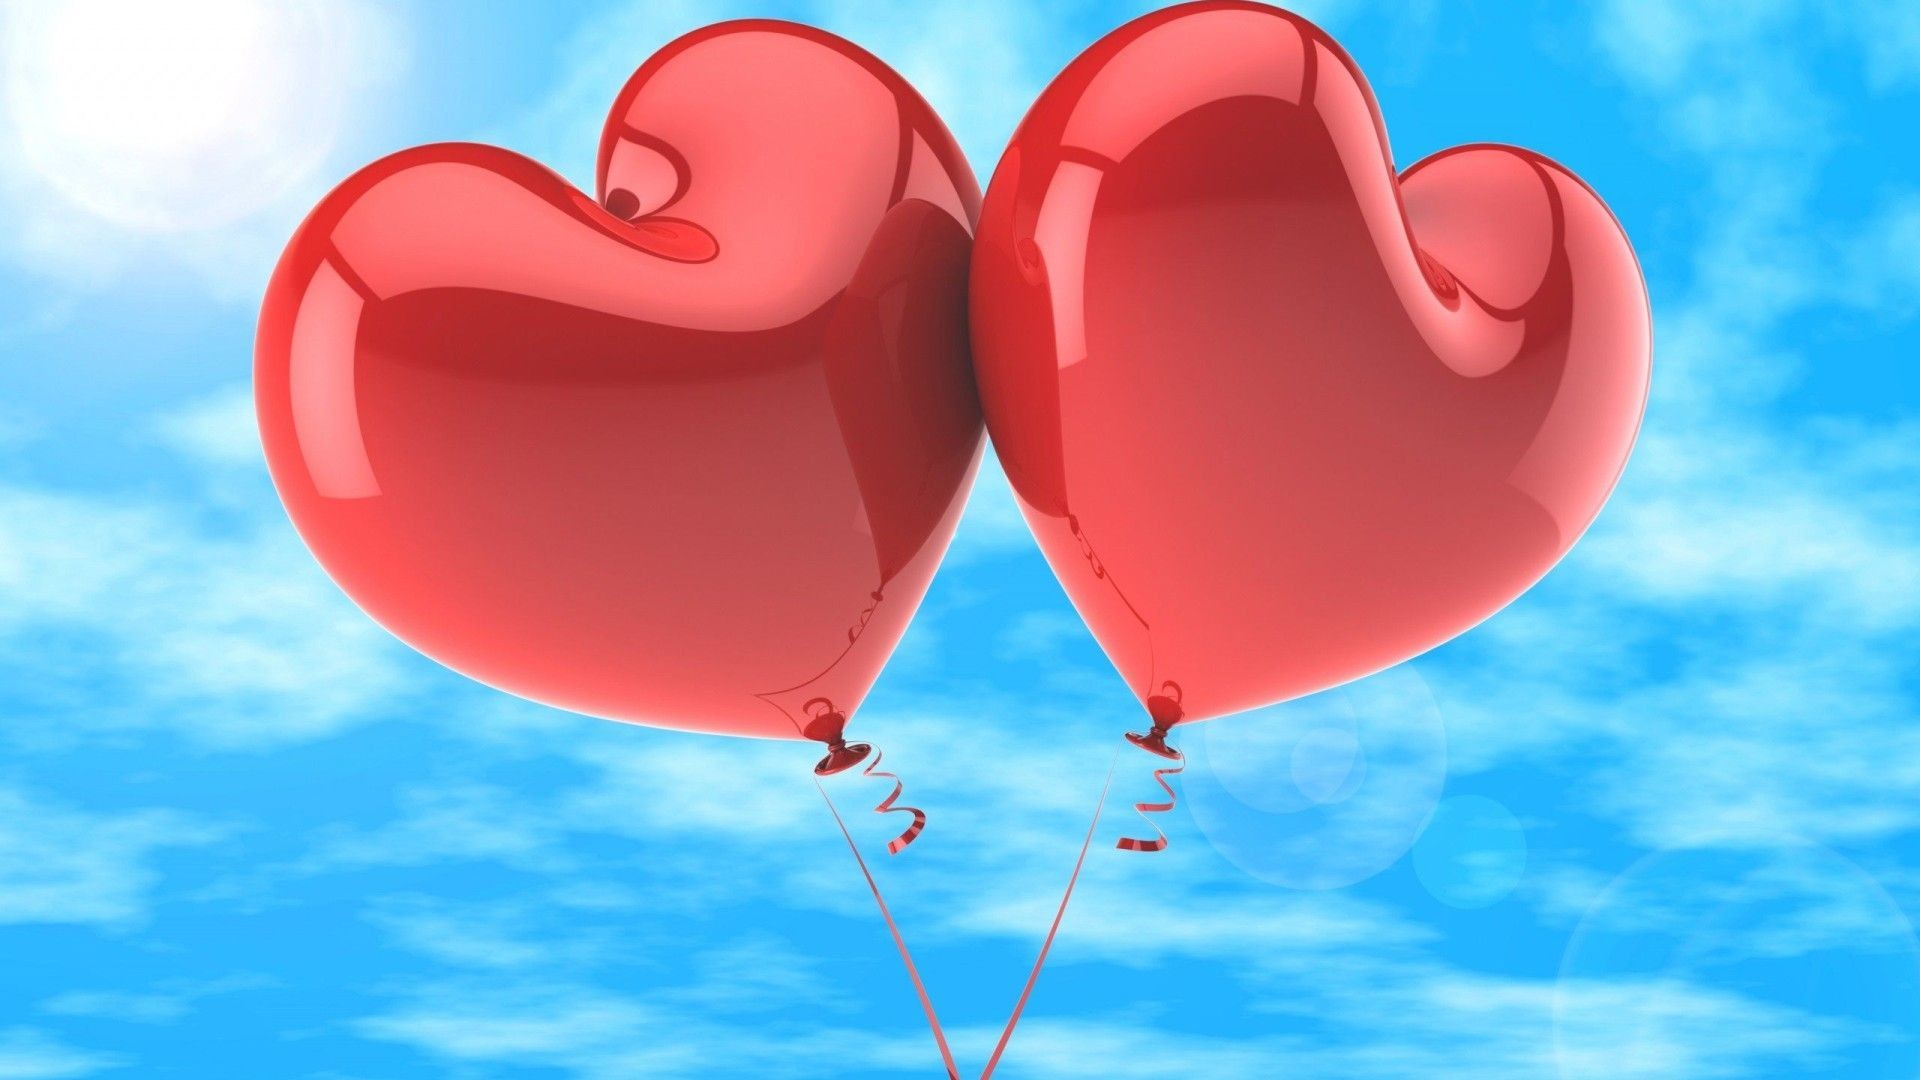 Heart Balloon Love Wallpaper HD Download Of Red Hearts